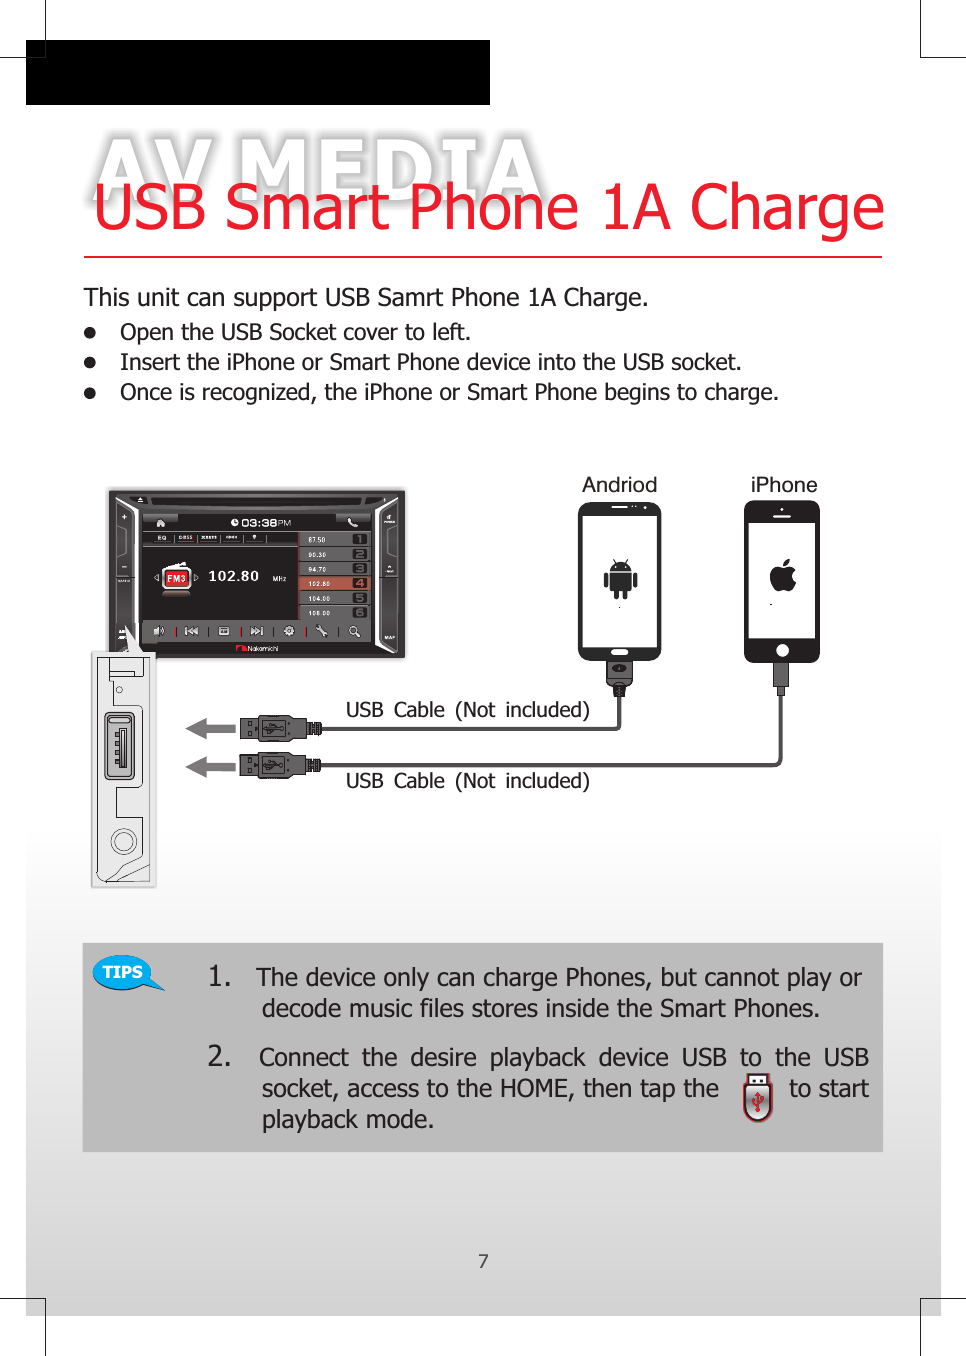 AV MEDIA7USB Smart Phone 1A Charge9This unit can support USB Samrt Phone 1A Charge.       Open the USB Socket cover to left.Insert the iPhone or Smart Phone device into the USB socket.Once is recognized, the iPhone or Smart Phone begins to charge.        TIPS 1.   The device only can charge Phones, but cannot play or        decode music files stores inside the Smart Phones.2.   Connect  the  desire  playback  device  USB  to  the  USB        socket, access to the HOME, then tap the         to start       playback mode.USB Cable (Not included)  Andriod iPhoneUSB Cable (Not included)